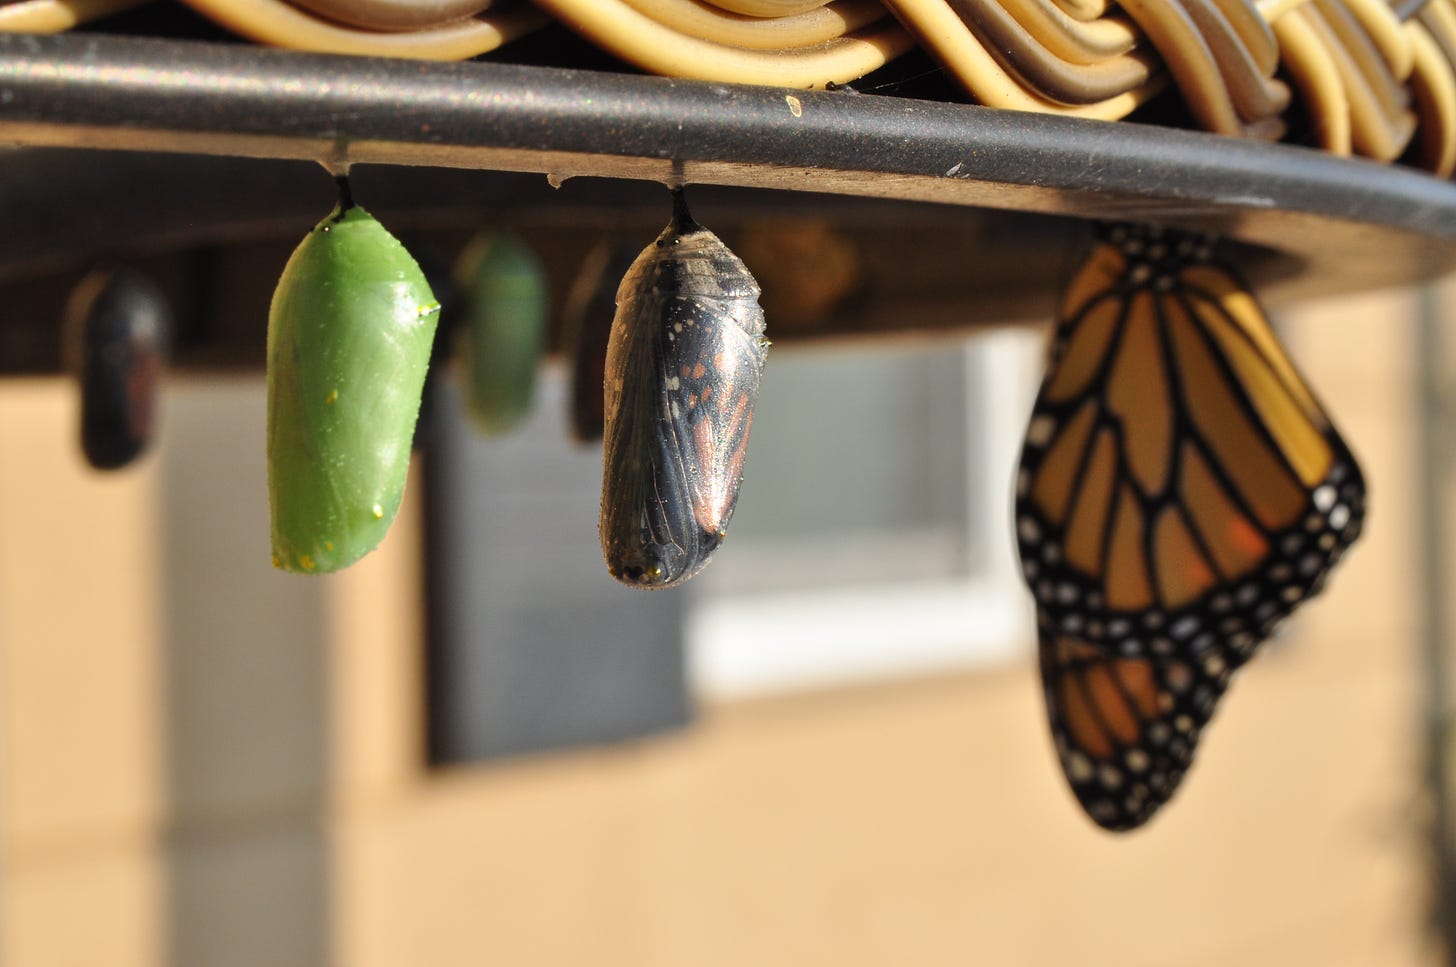 In this image you can see the new green chrysalis coloration, one that’s about ready to emerge (the clear one), and a butterfly that’s already come out.